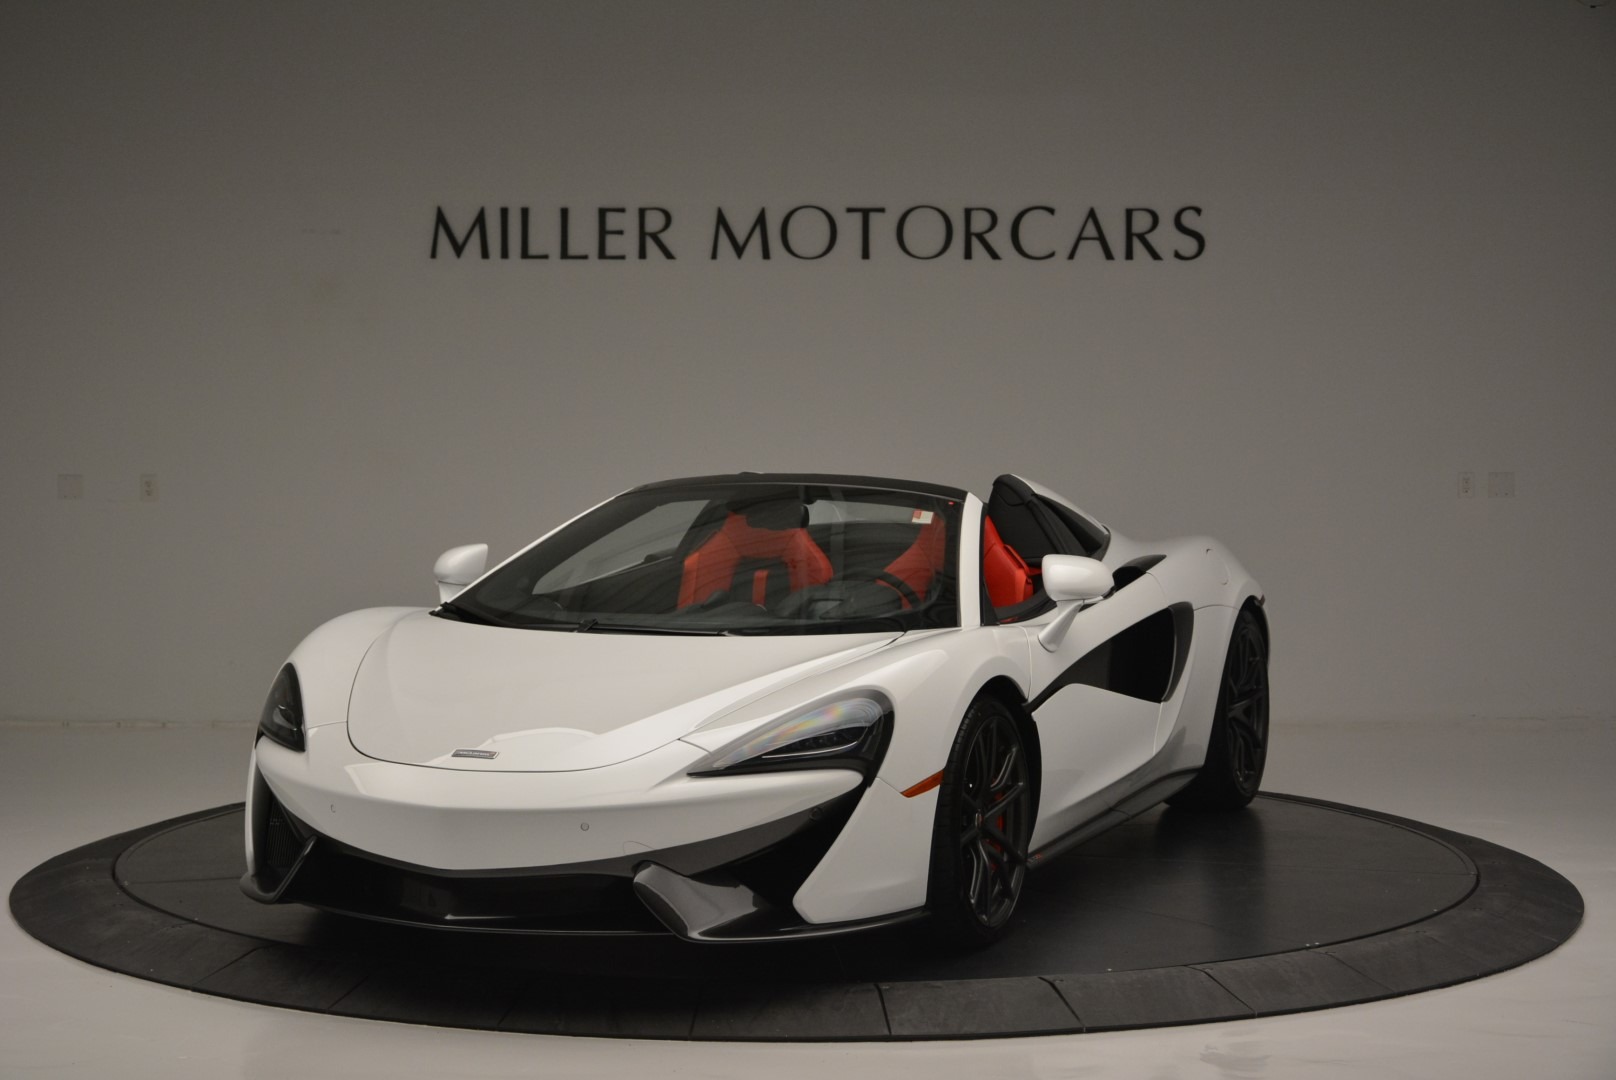 Used 2018 McLaren 570S Spider for sale Sold at Alfa Romeo of Greenwich in Greenwich CT 06830 1